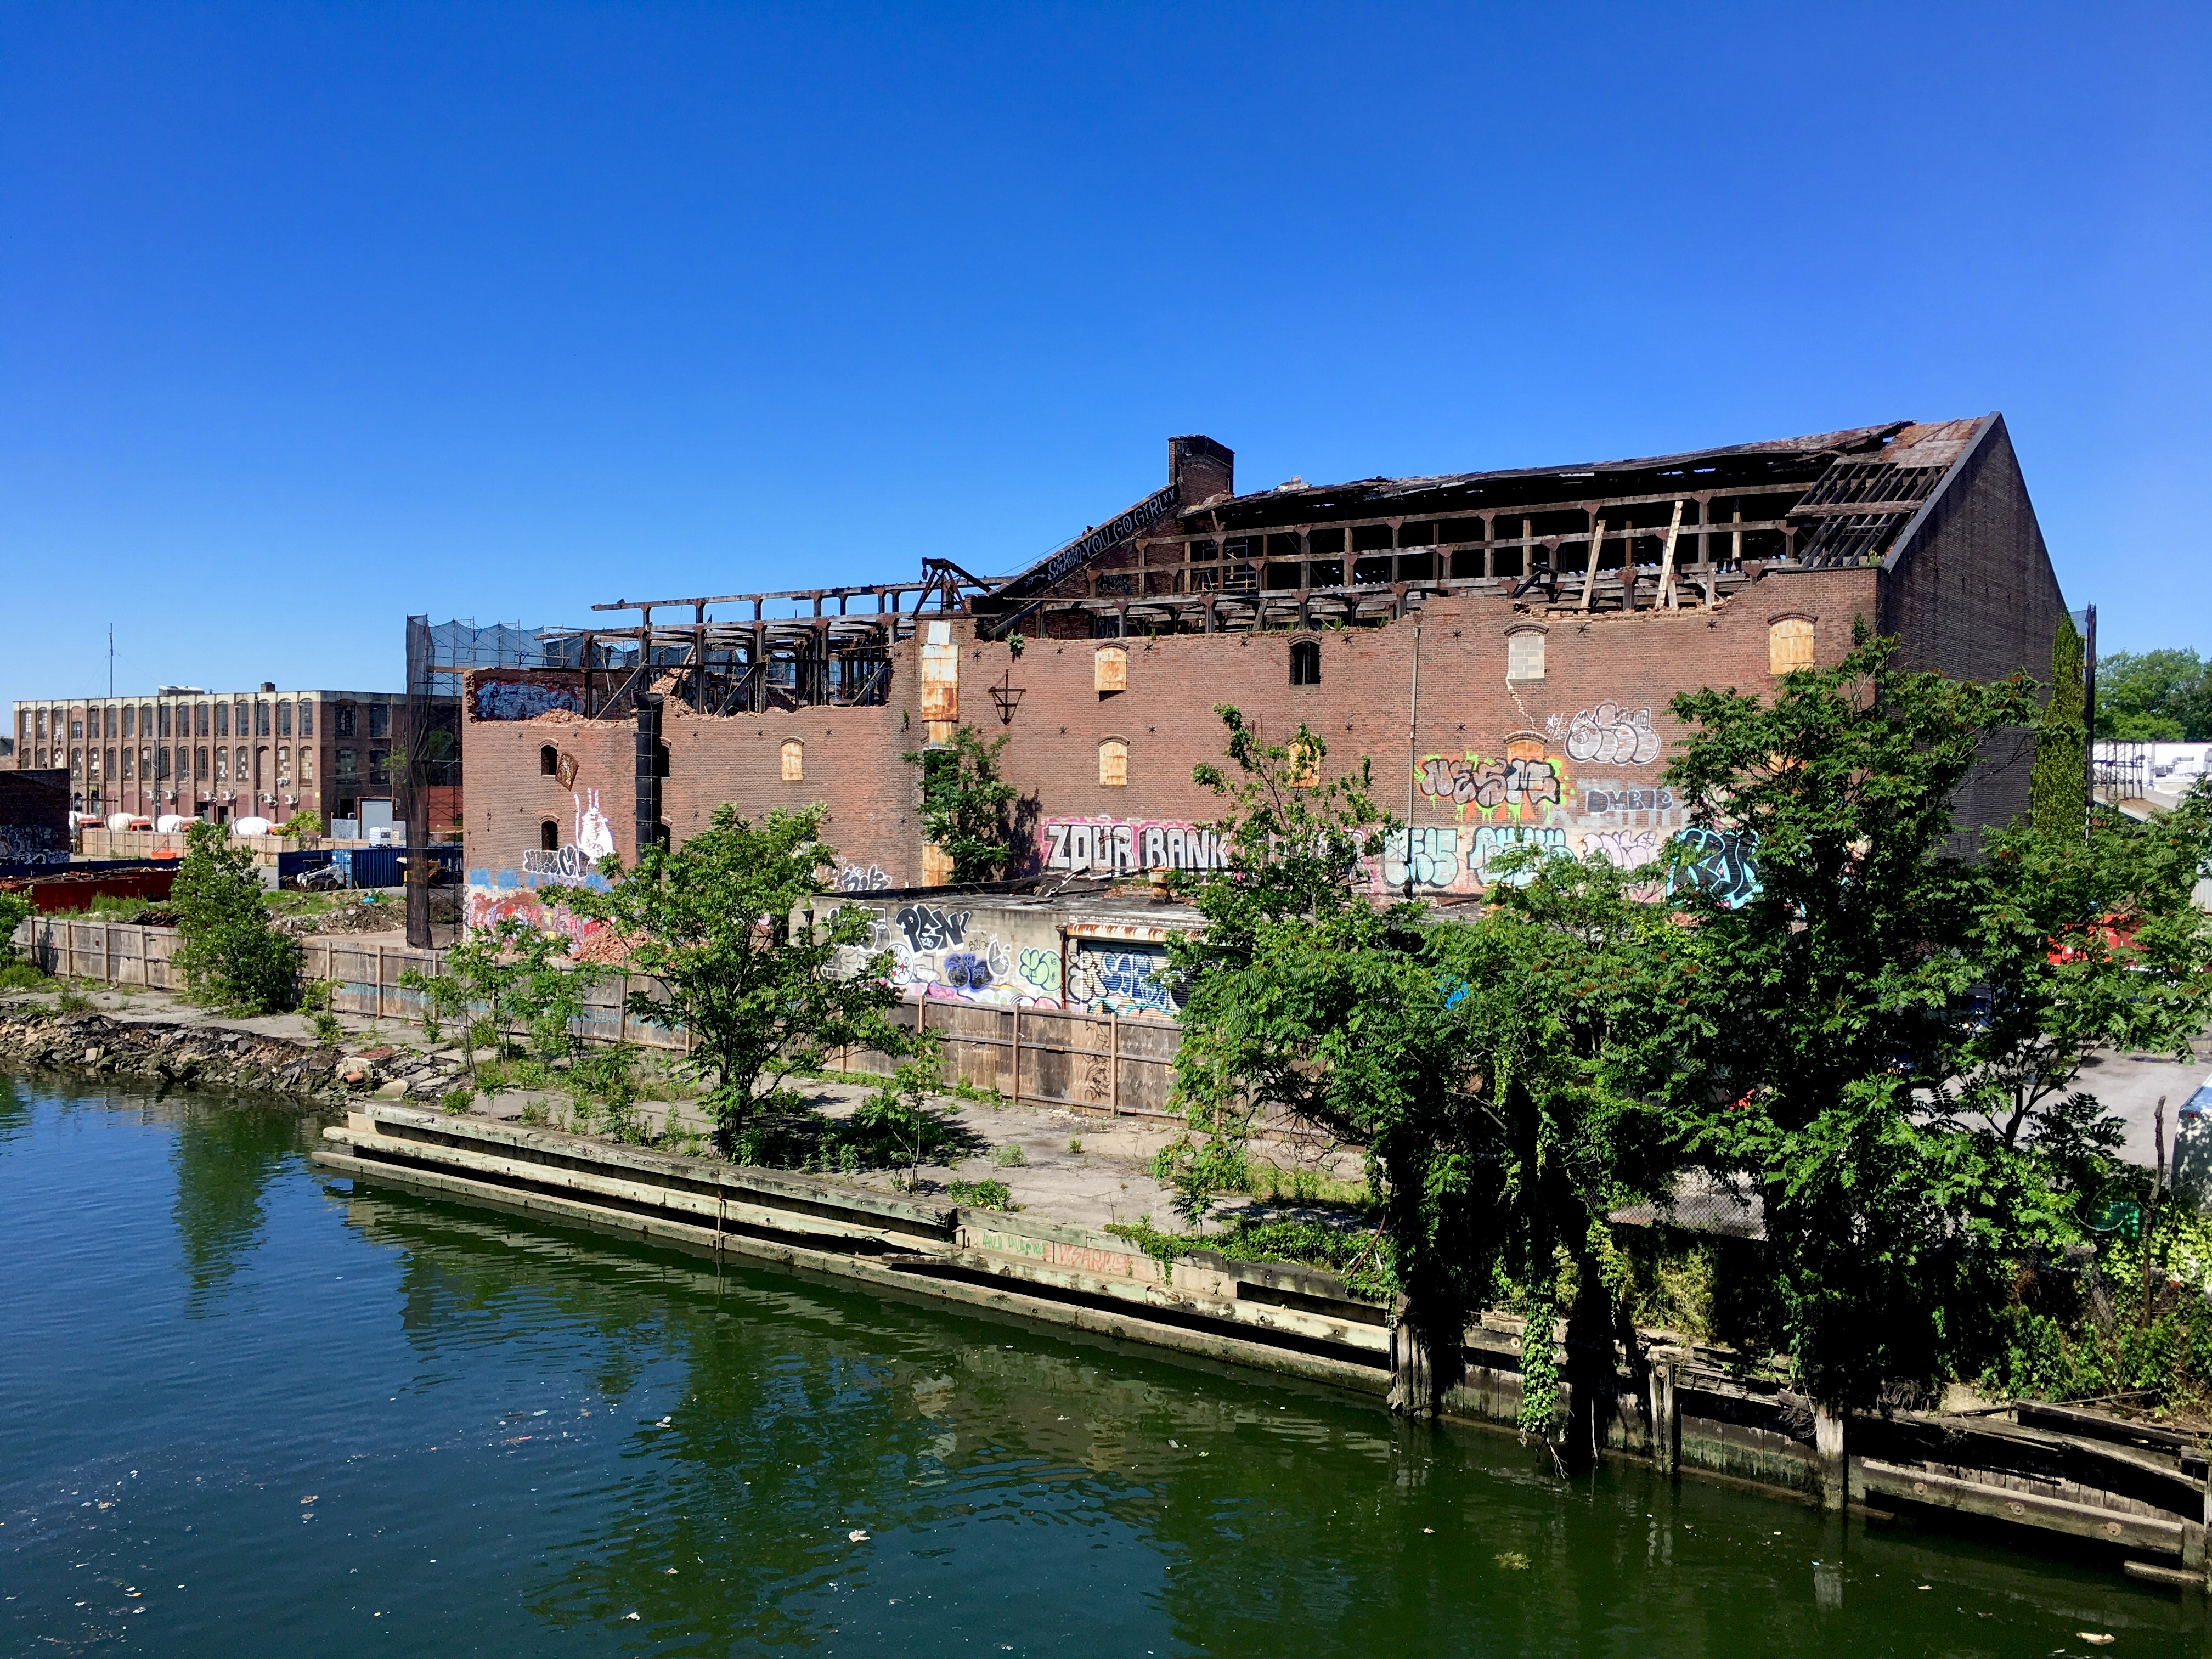 The S.W. Bowne Grain Storehouse, which is being demolished, is not being considered for landmarking. Eagle photo by Lore Croghan